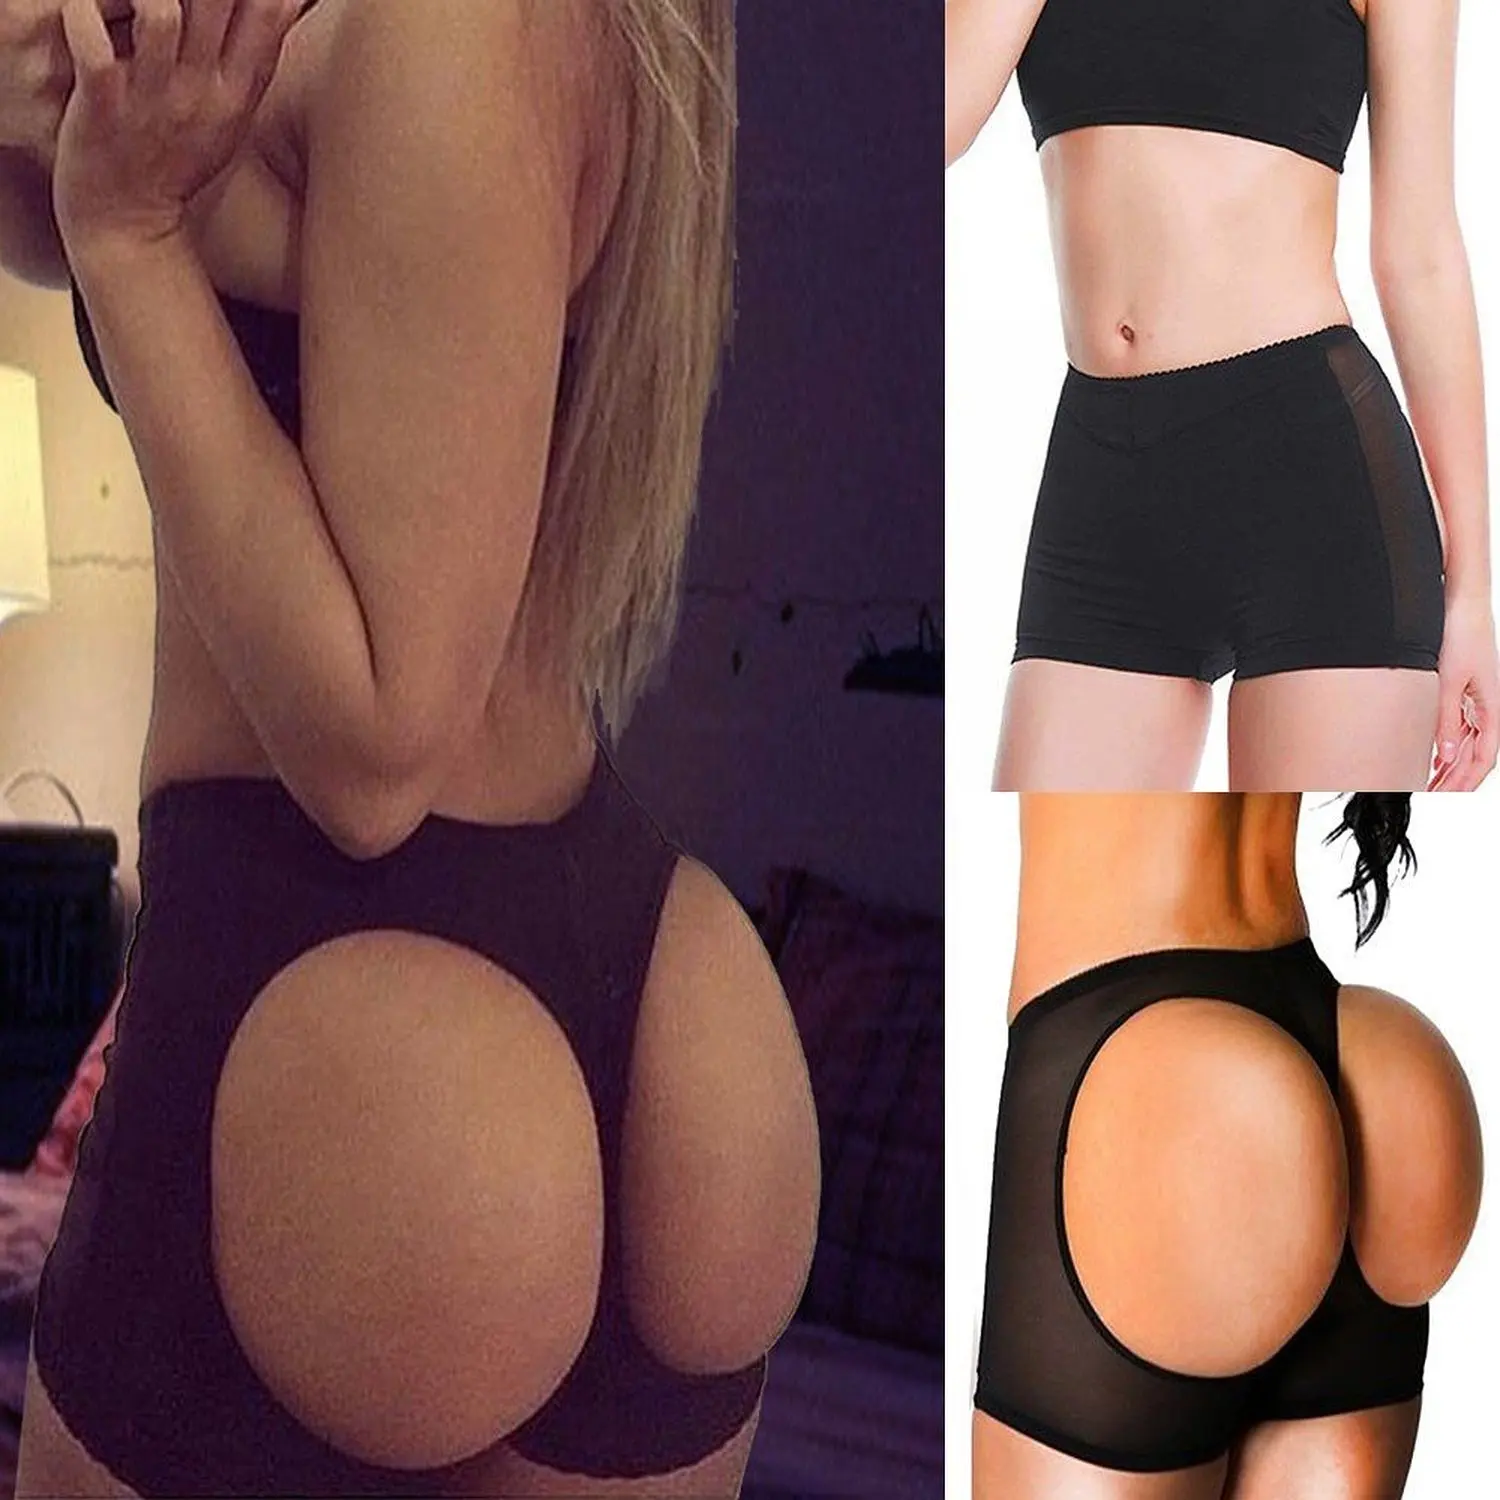 Buy Butt Lifter Panty Lift Push Up Hollow Panties Girdle Control Brazilian  Buttocks in Cheap Price on Alibaba.com